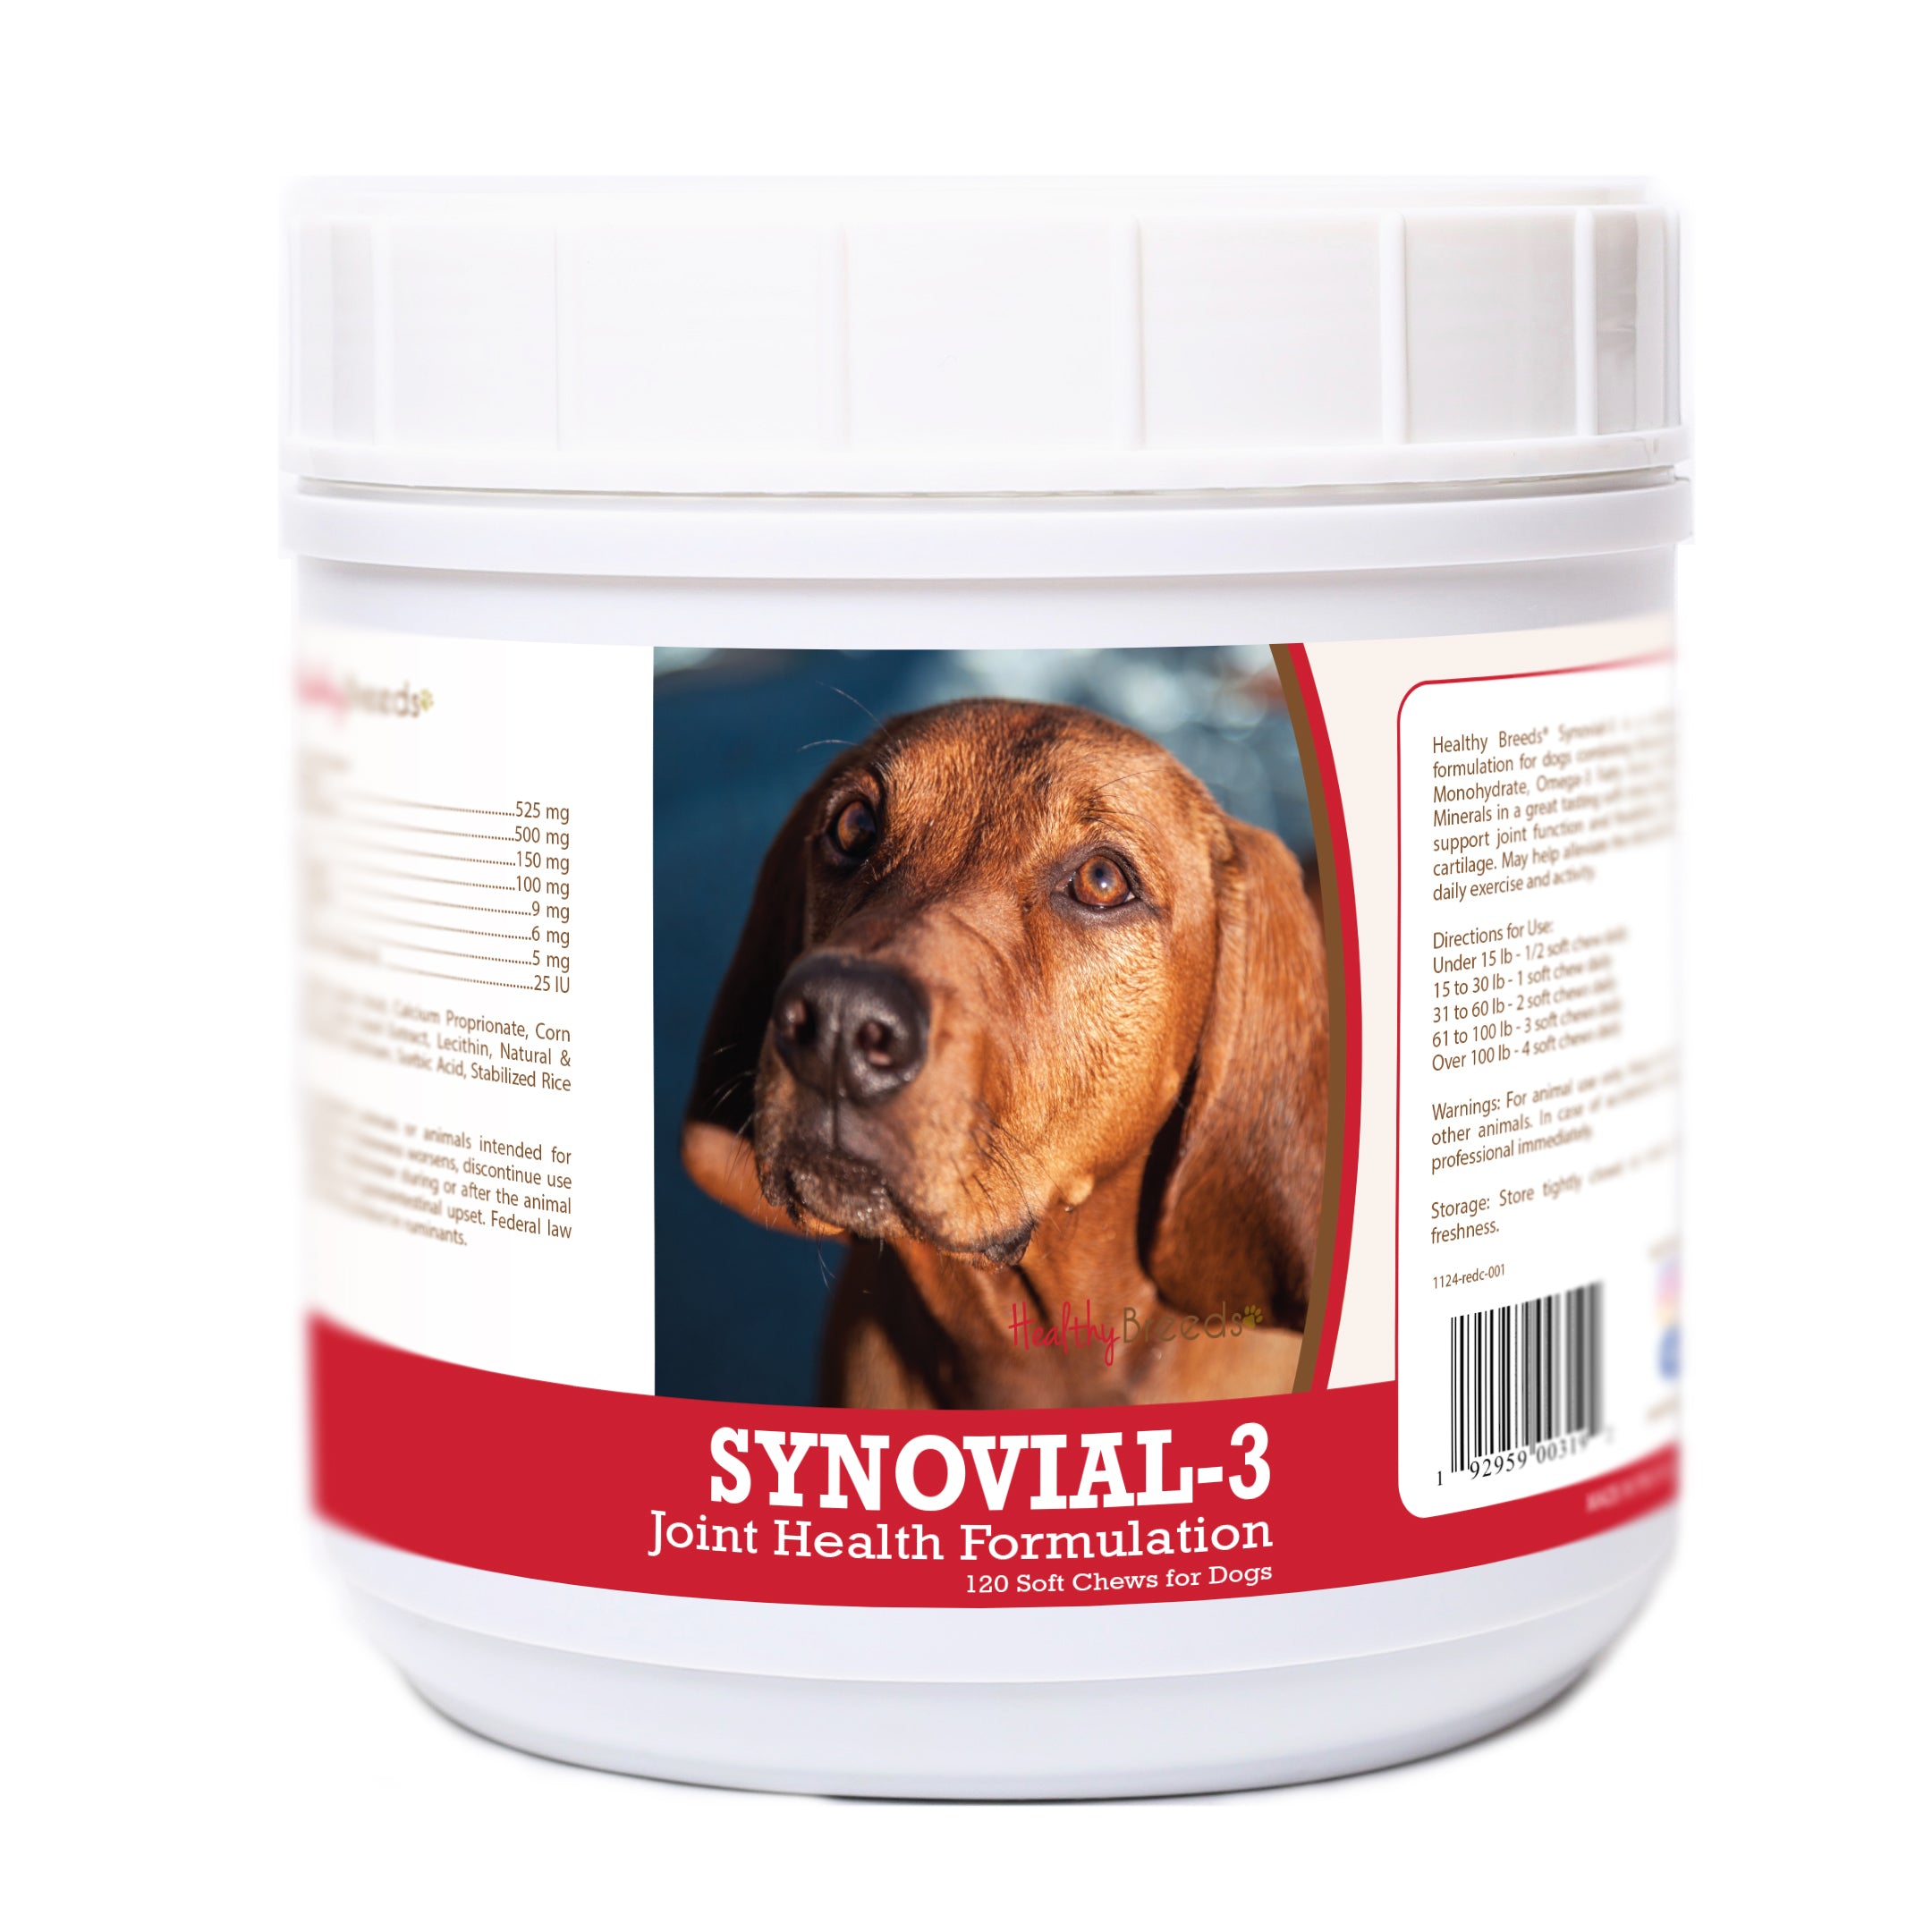 Redbone Coonhound Synovial-3 Joint Health Formulation Soft Chews 120 Count